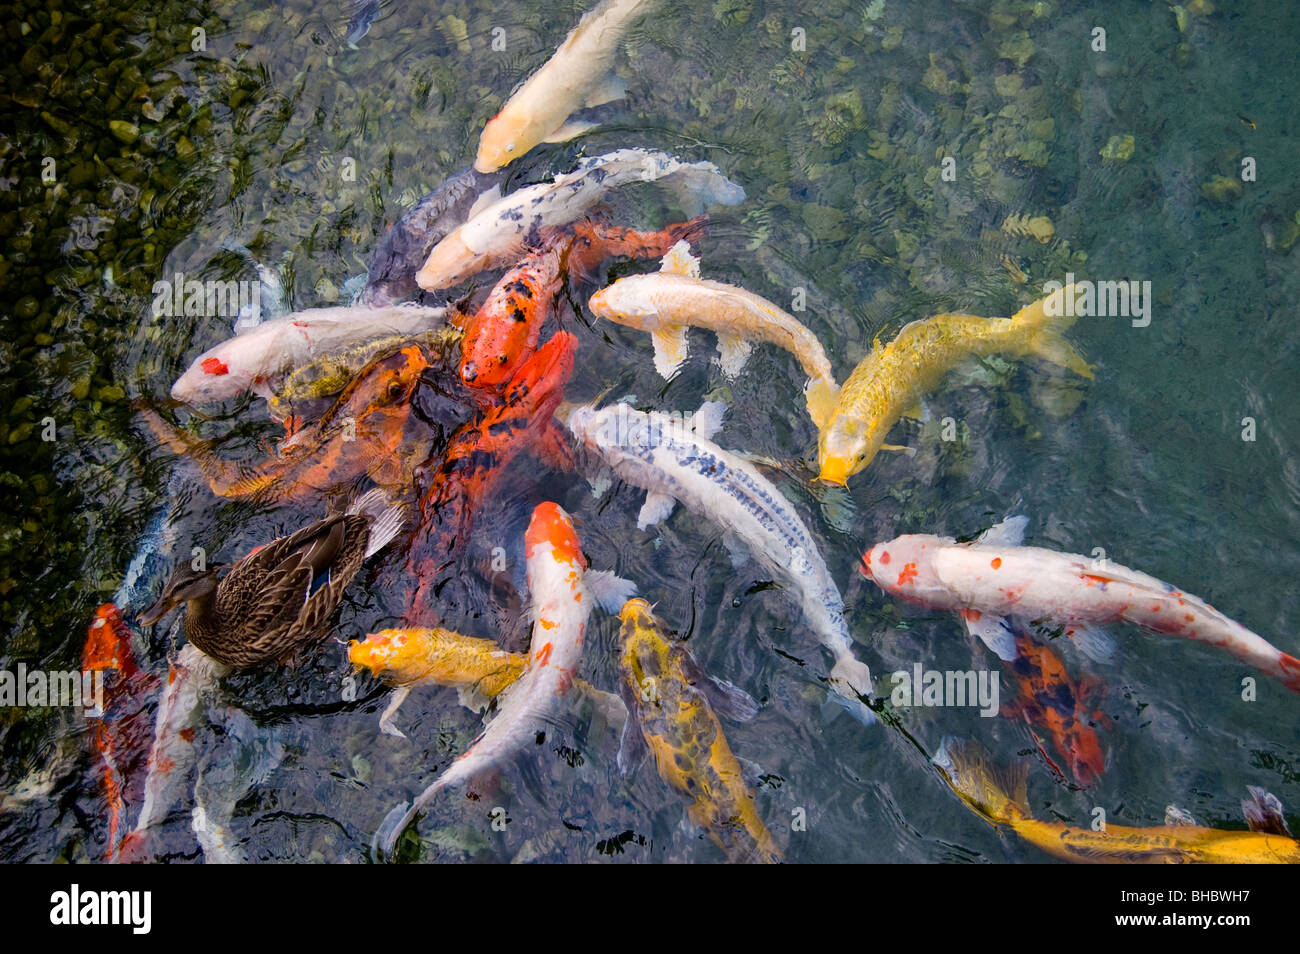 A duck and fish swim in a pond. Stock Photo